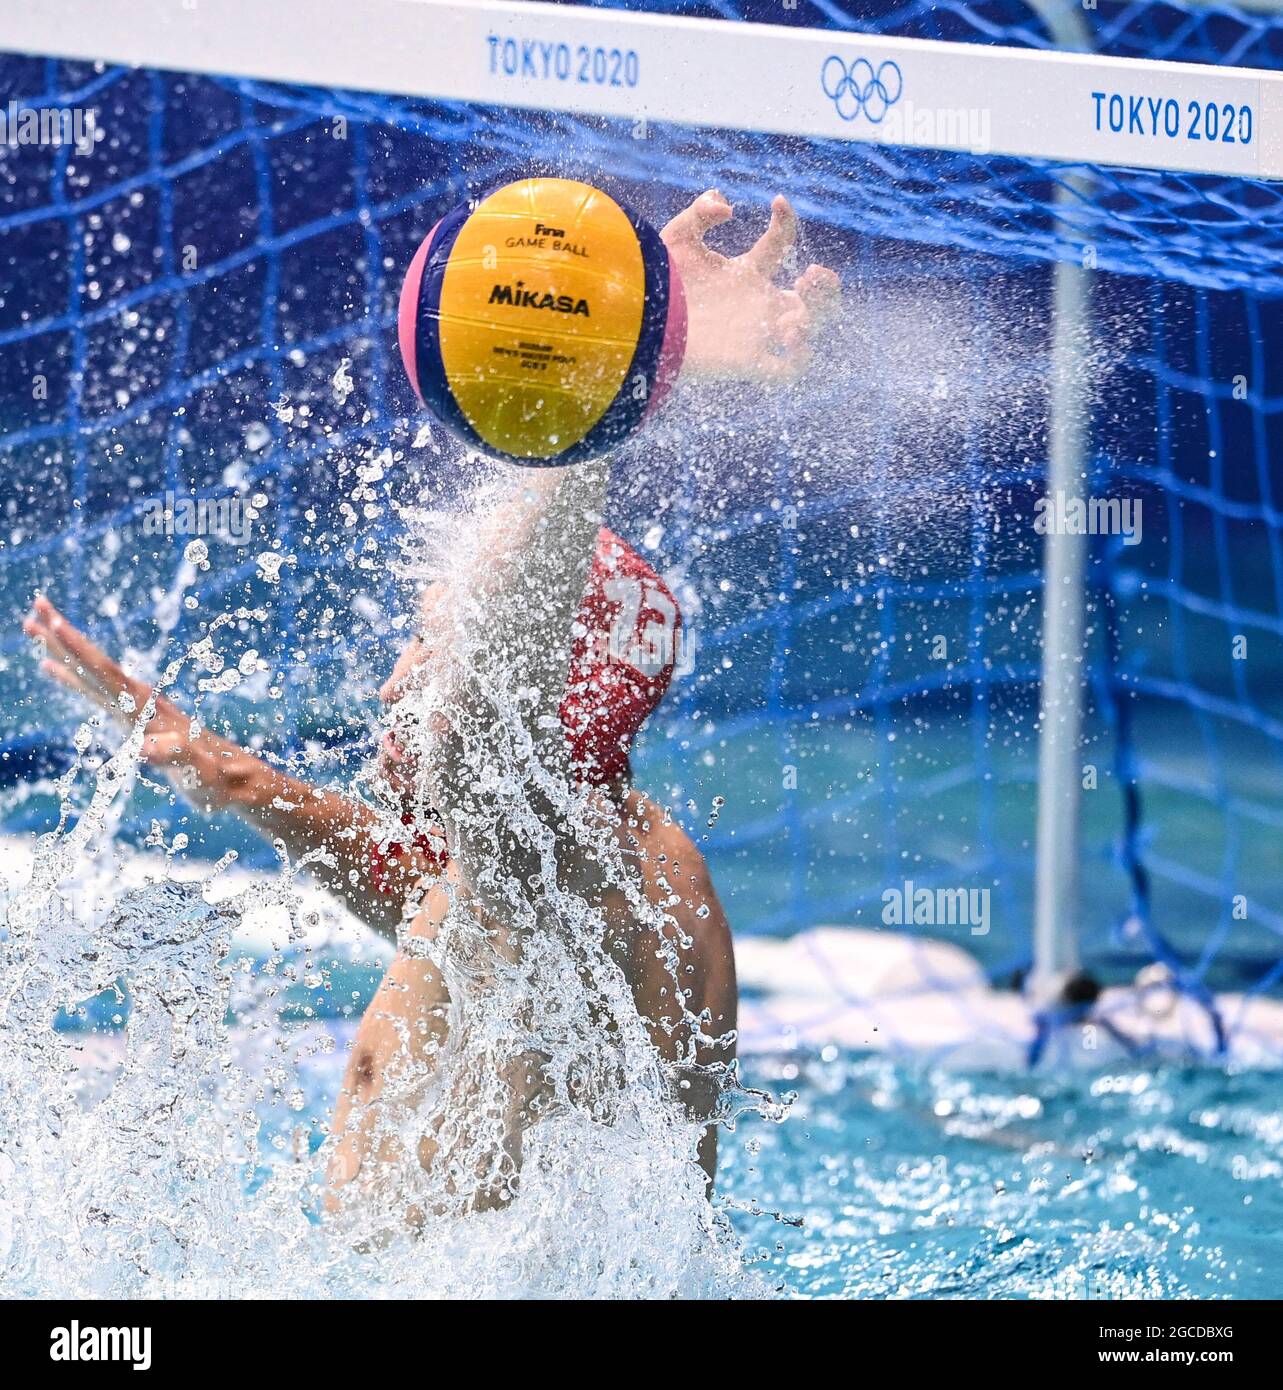 Tokyo, Japan. 8th Aug, 2021. Goalkeeper of Team Serbia Branislav Mitrovic competes during the men's water polo final at Tokyo 2020 Olympic Games, in Tokyo, Japan, Aug. 8, 2021. Credit: Xia Yifang/Xinhua/Alamy Live News Stock Photo